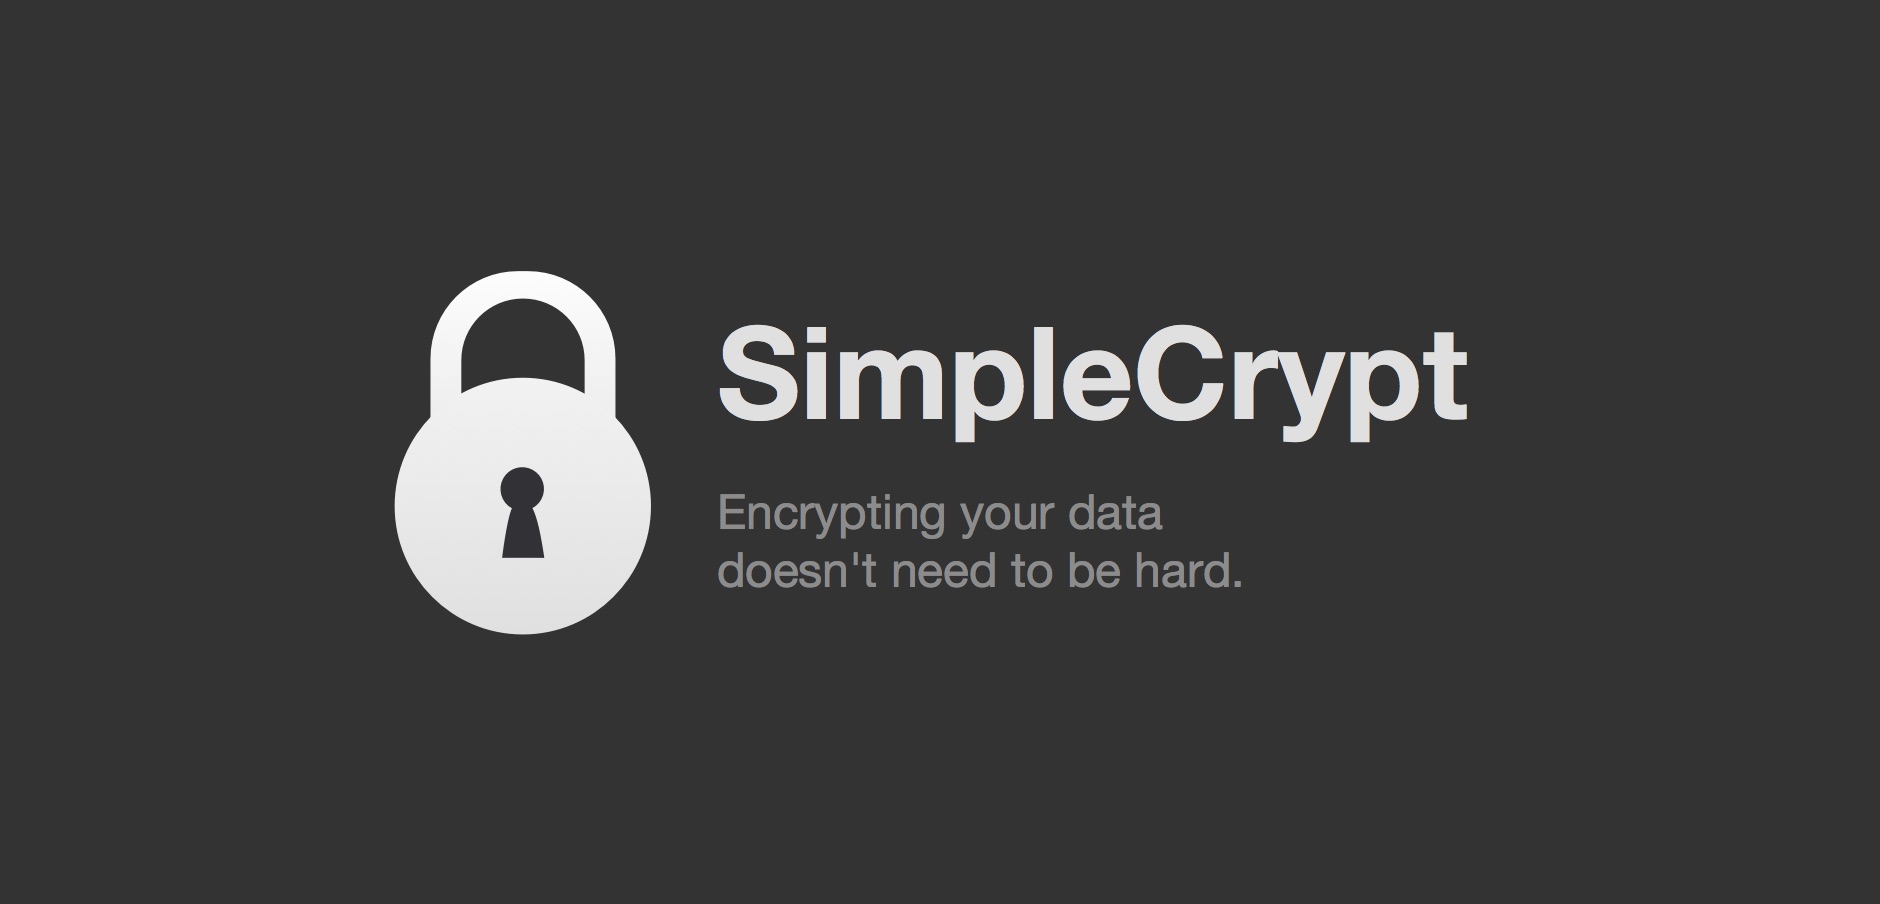 SimpleCrypt Logo with slogan 'Encrypting your data doesn't need to be hard'.